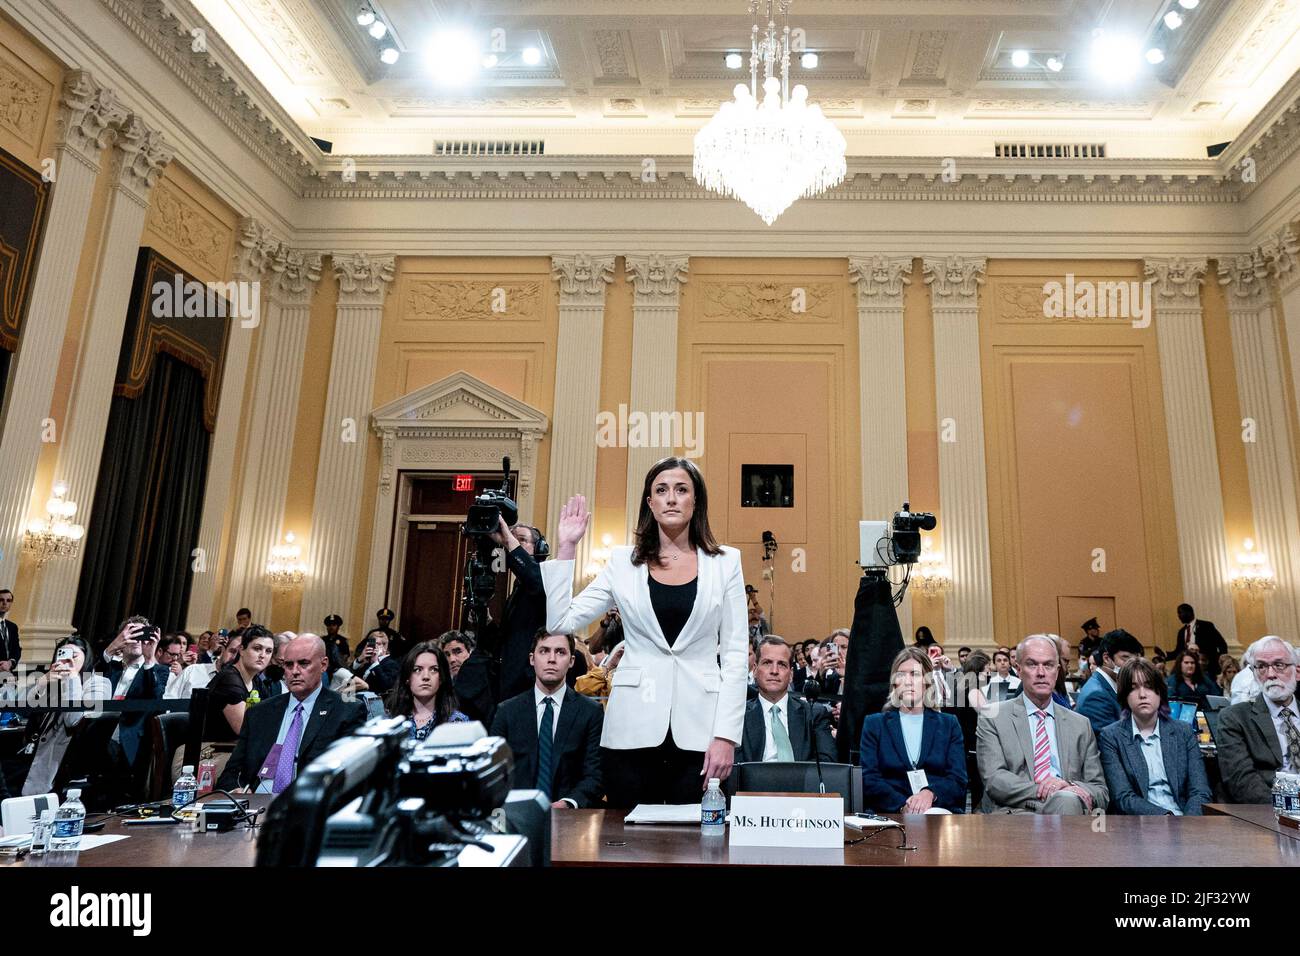 (220629) -- WASHINGTON, June 29, 2022 (Xinhua) -- Cassidy Hutchinson, an aide to former White House chief of staff Mark Meadows, is seen at a public hearing held by the U.S. House select committee investigating the Capital riot on Jan. 6, 2021 to provide testimony in Washington, DC, the United States, June 28, 2022. A former White House aide testified at a public hearing on Tuesday held by the U.S. House select committee investigating the Capital riot last year. (Andrew Harnik/Pool via Xinhua) Stock Photo